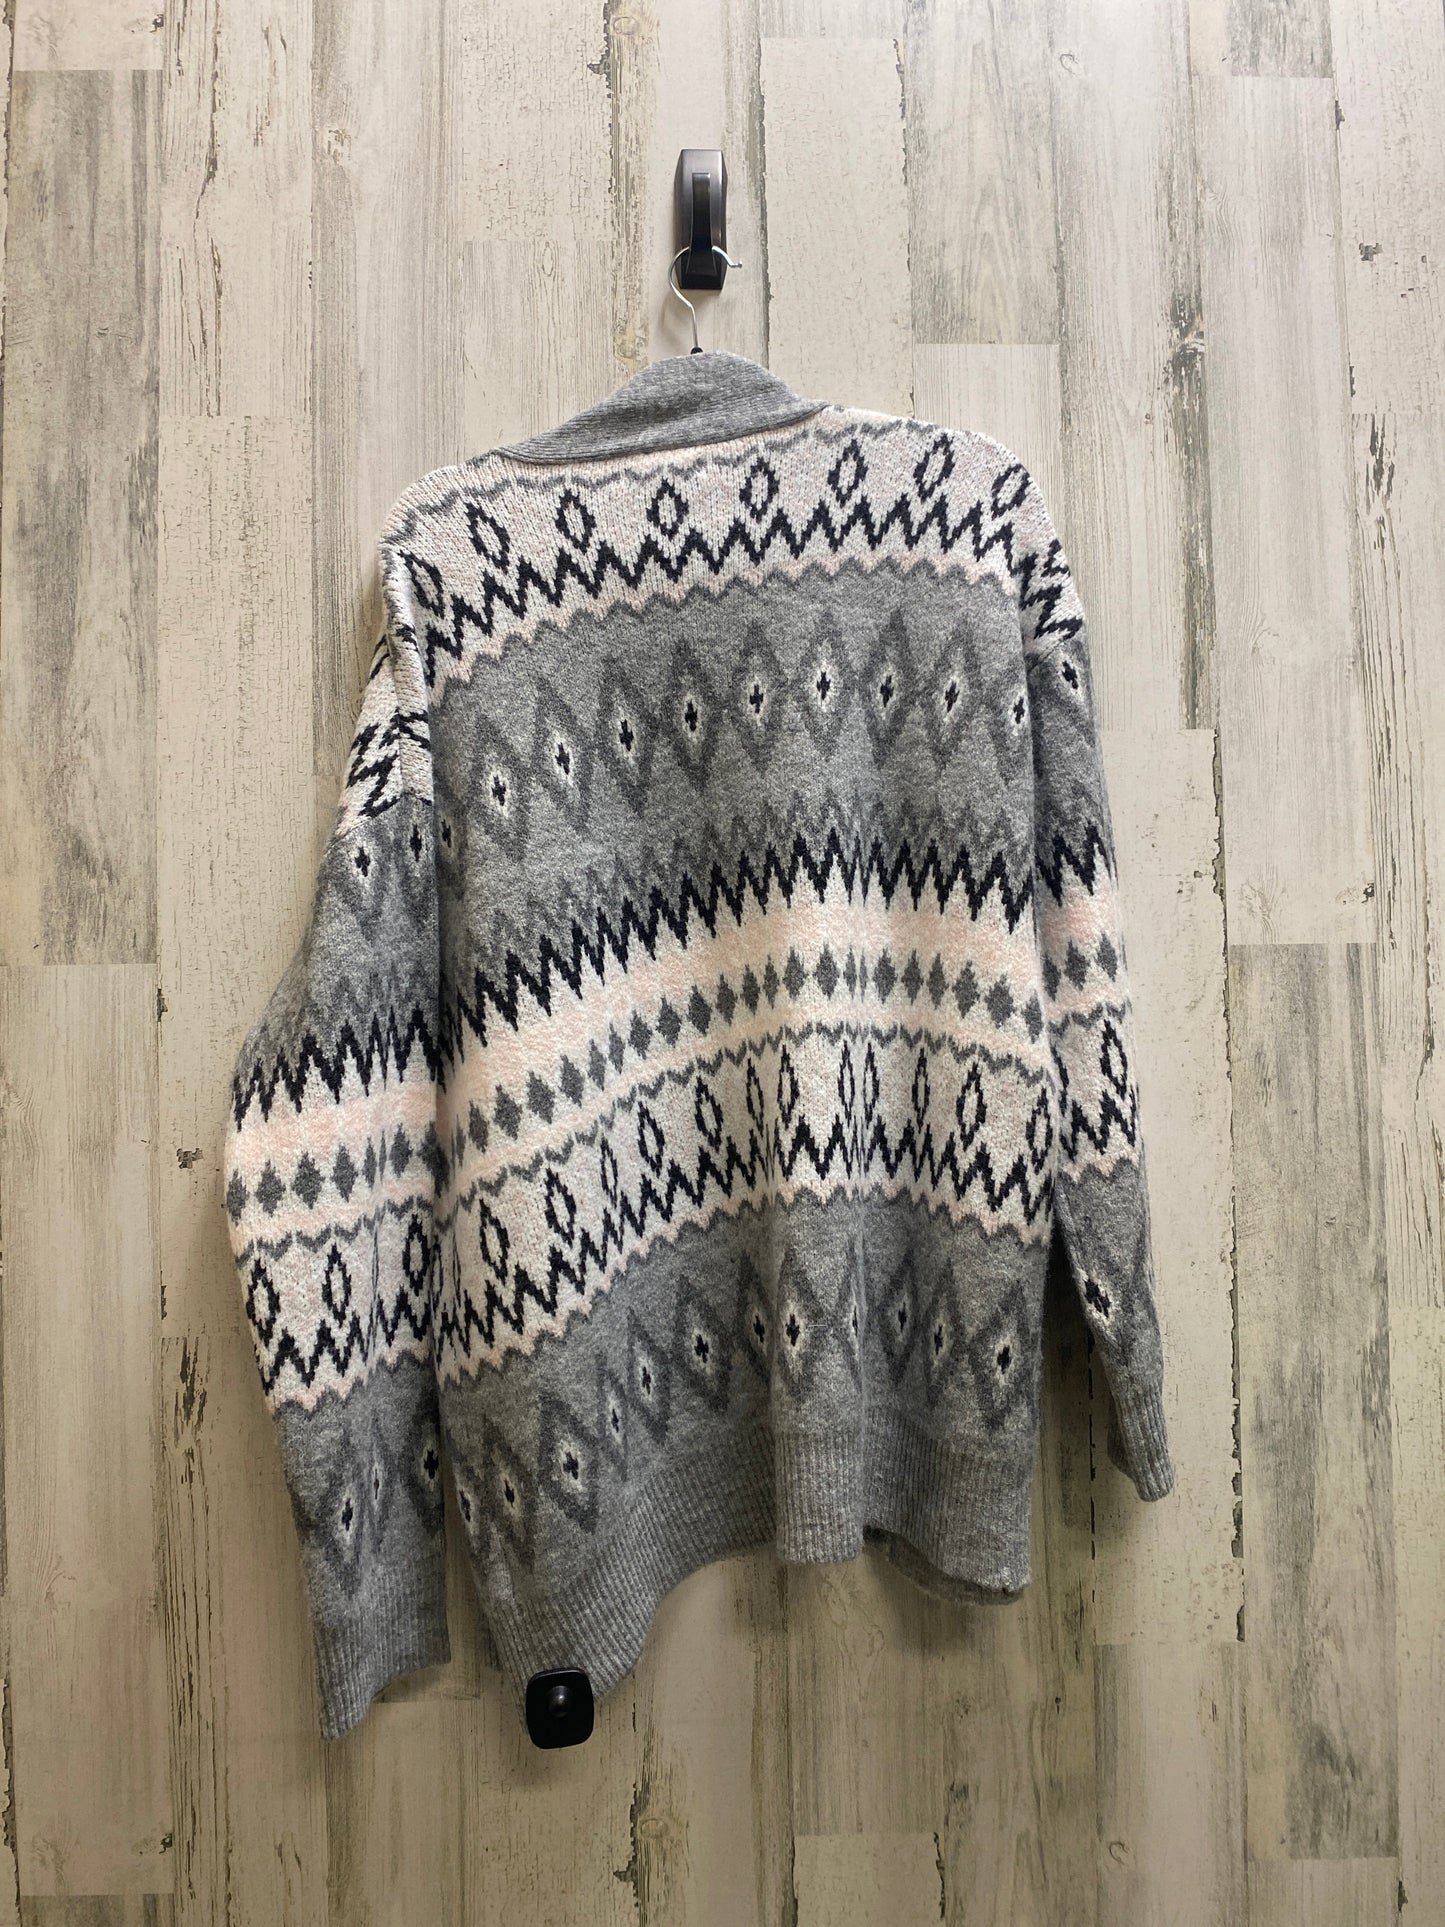 Sweater Cardigan By Croft And Barrow  Size: 2x